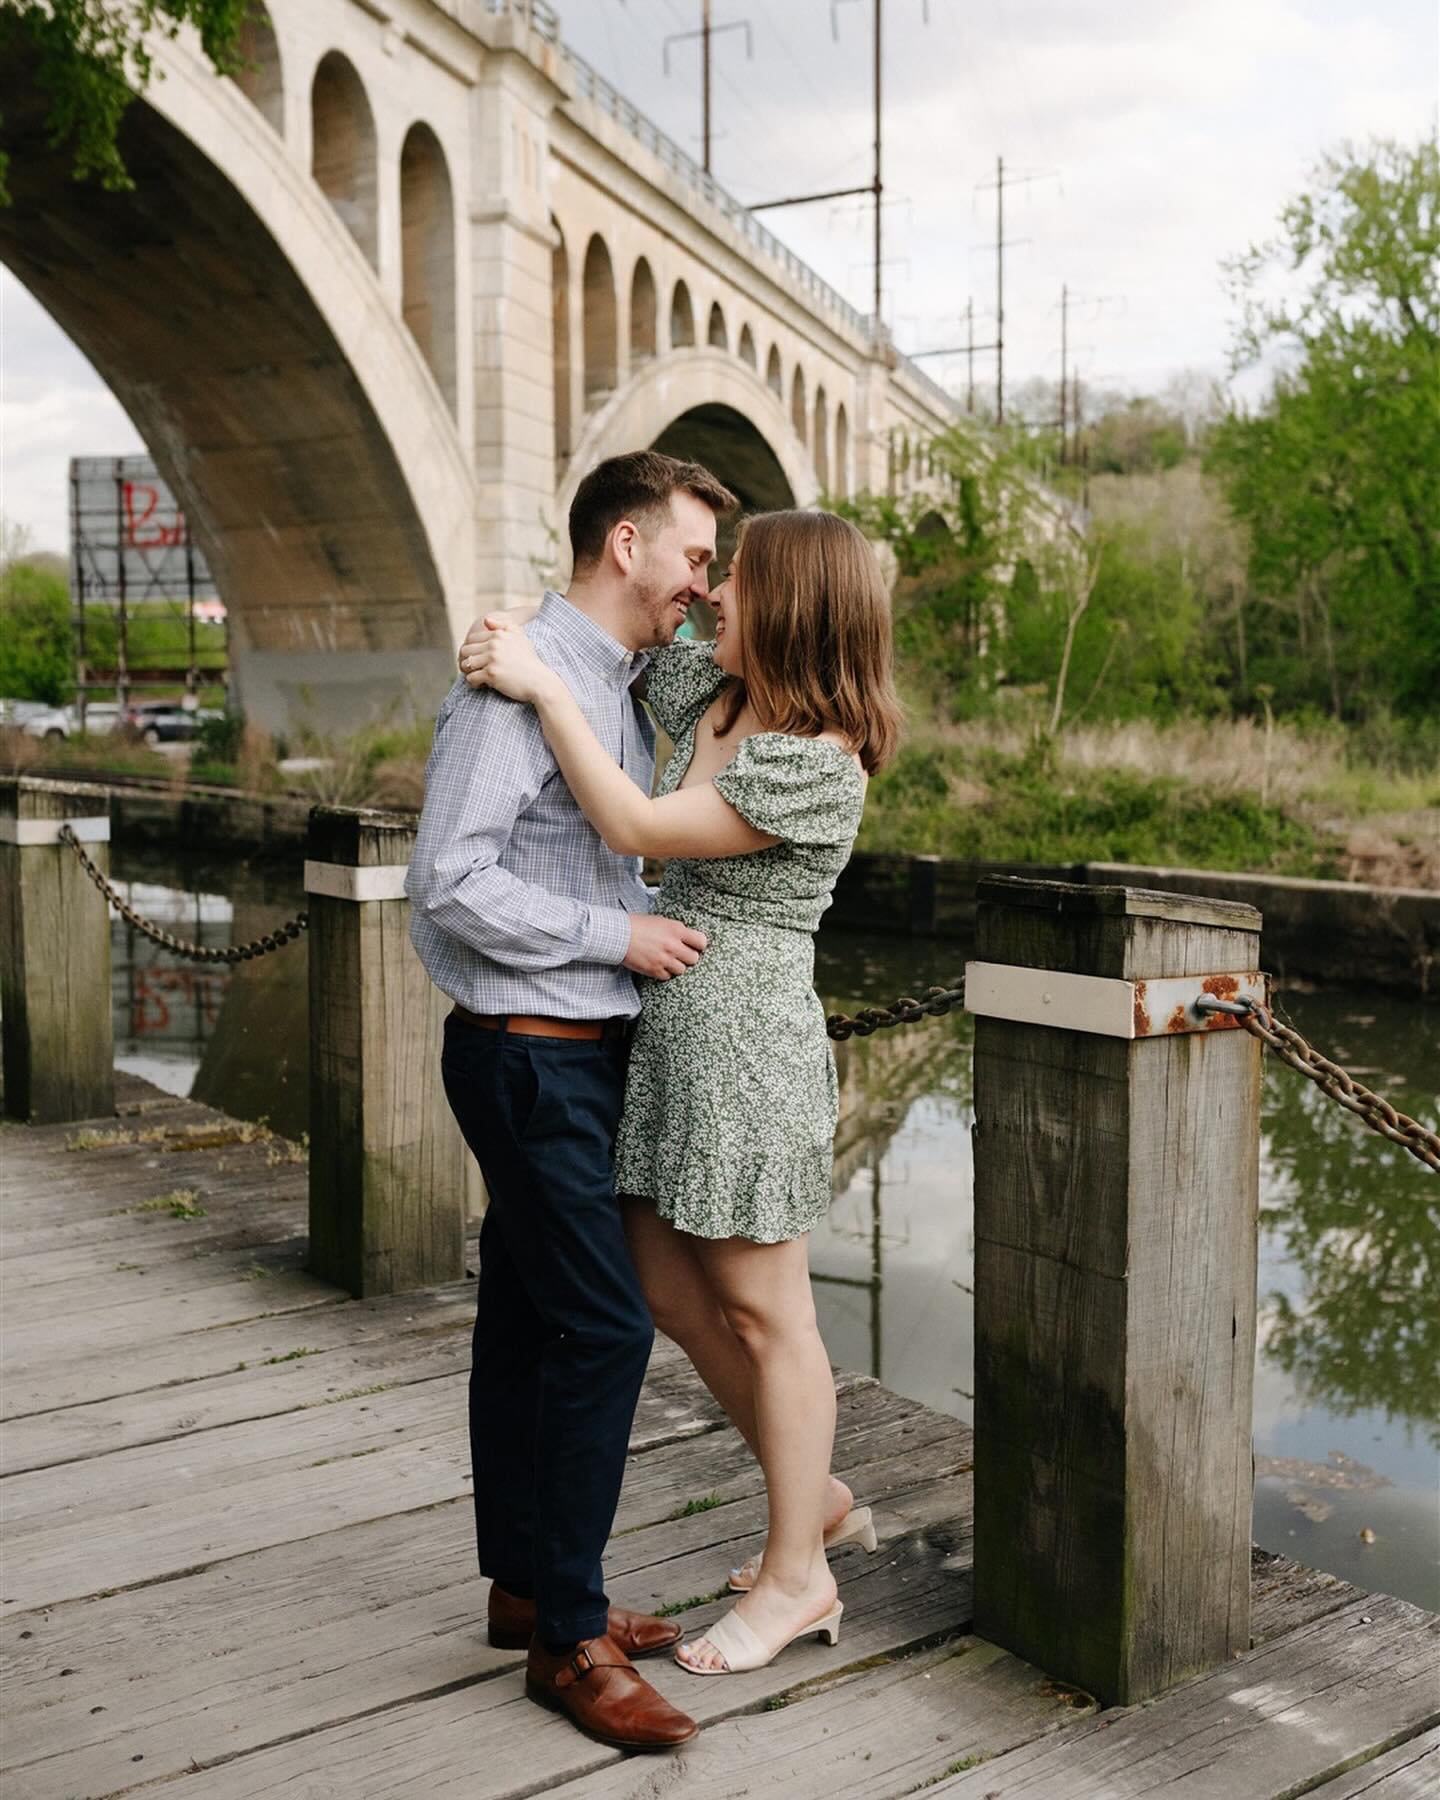 Love this sweet and joyful Manayunk engagement session!